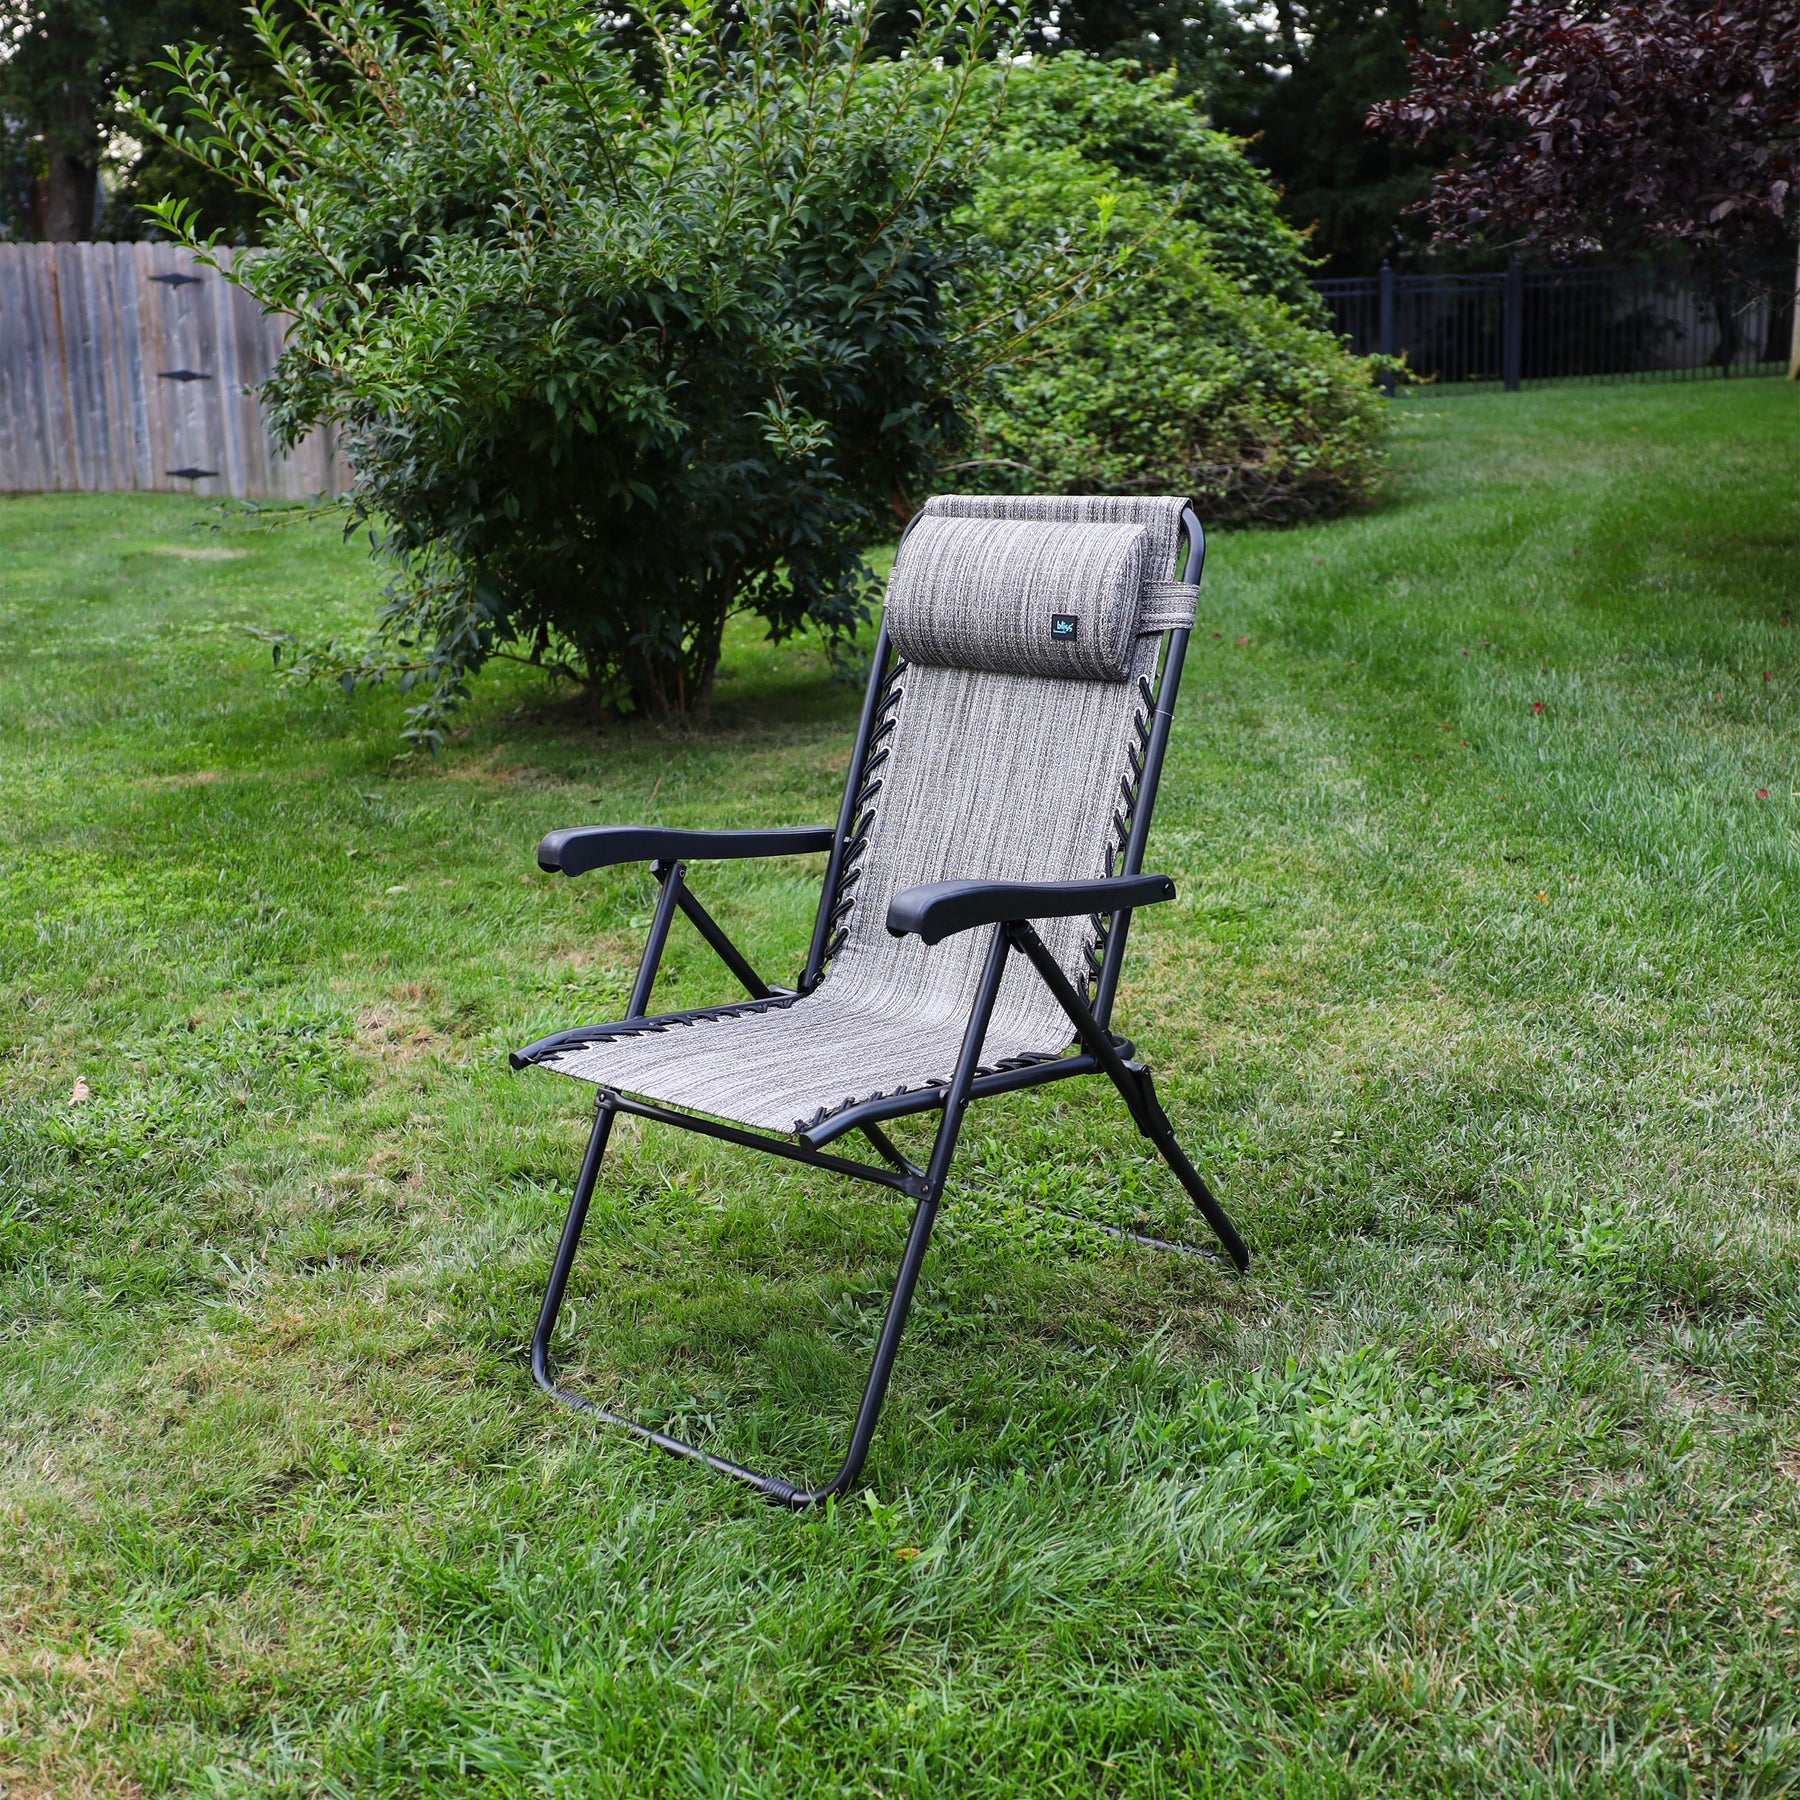 26-inch Reclining Platinum Sling Chair on a lawn.